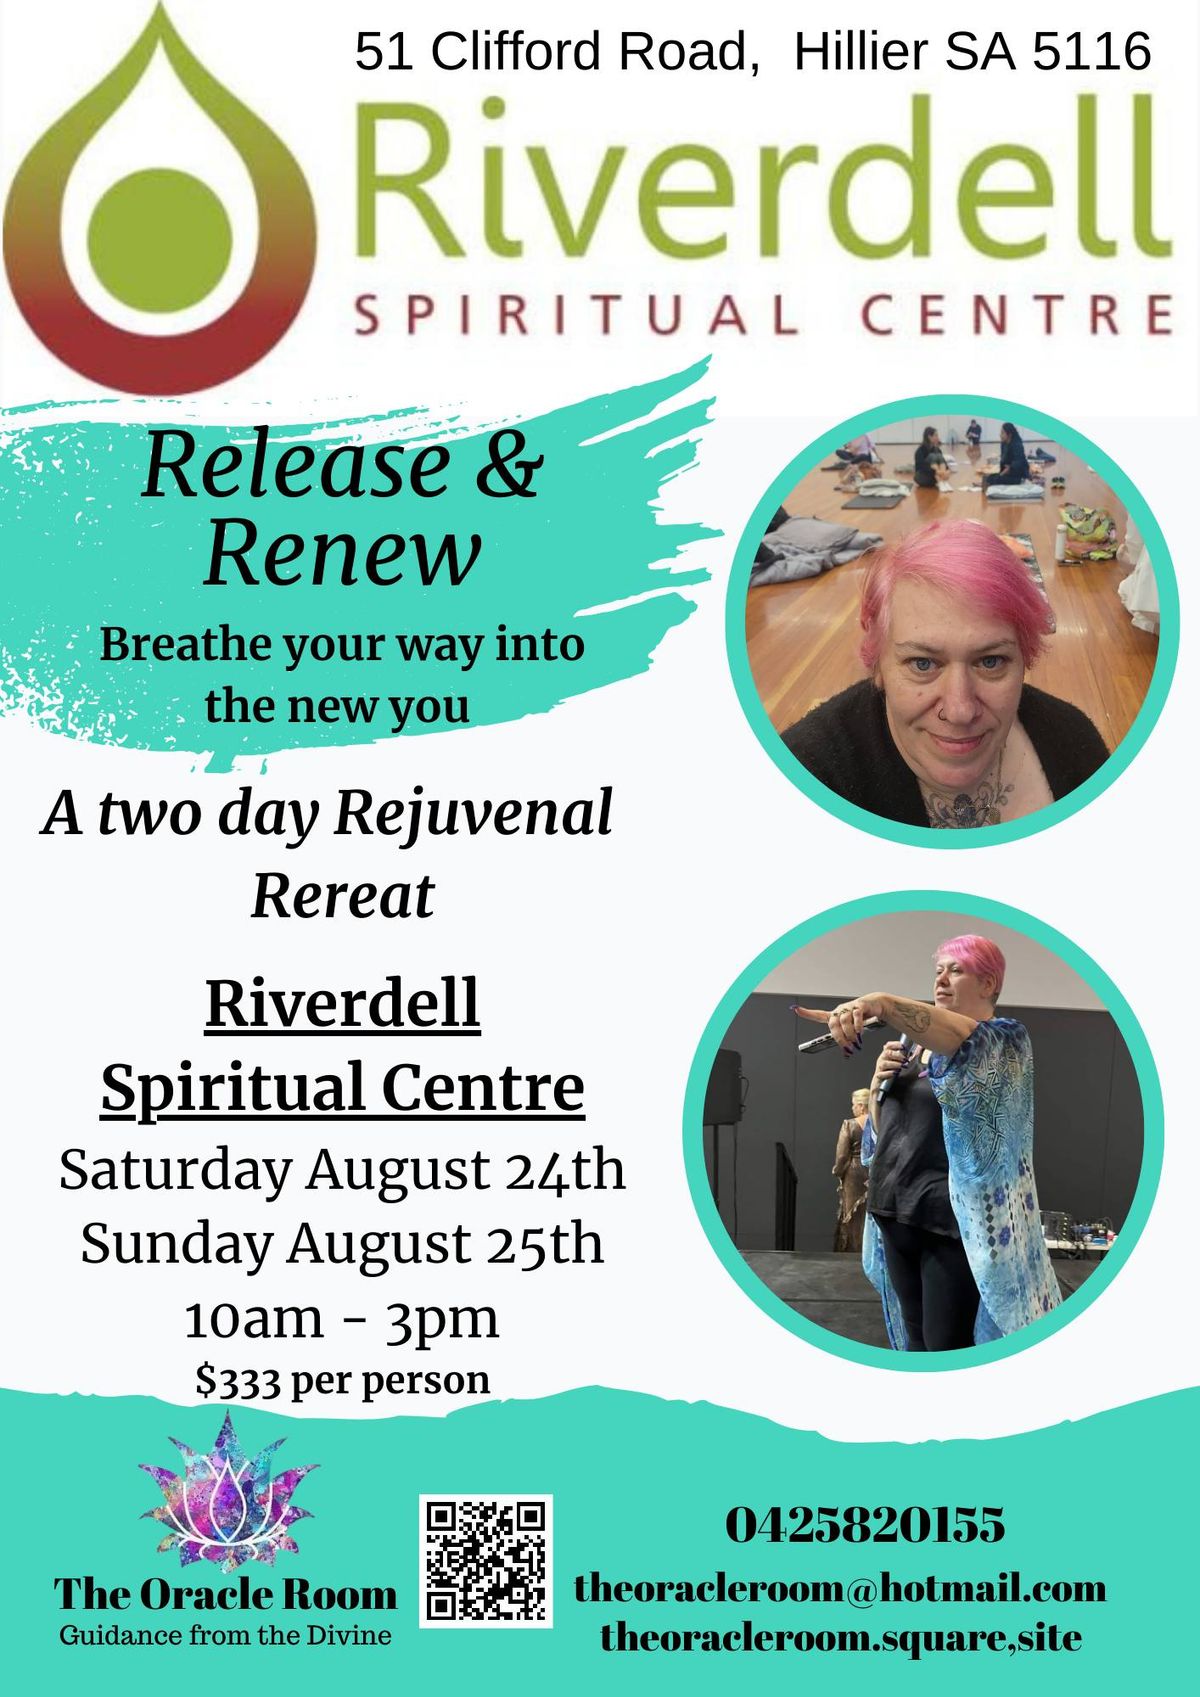 Release & Renew - Breathe your way into the new you